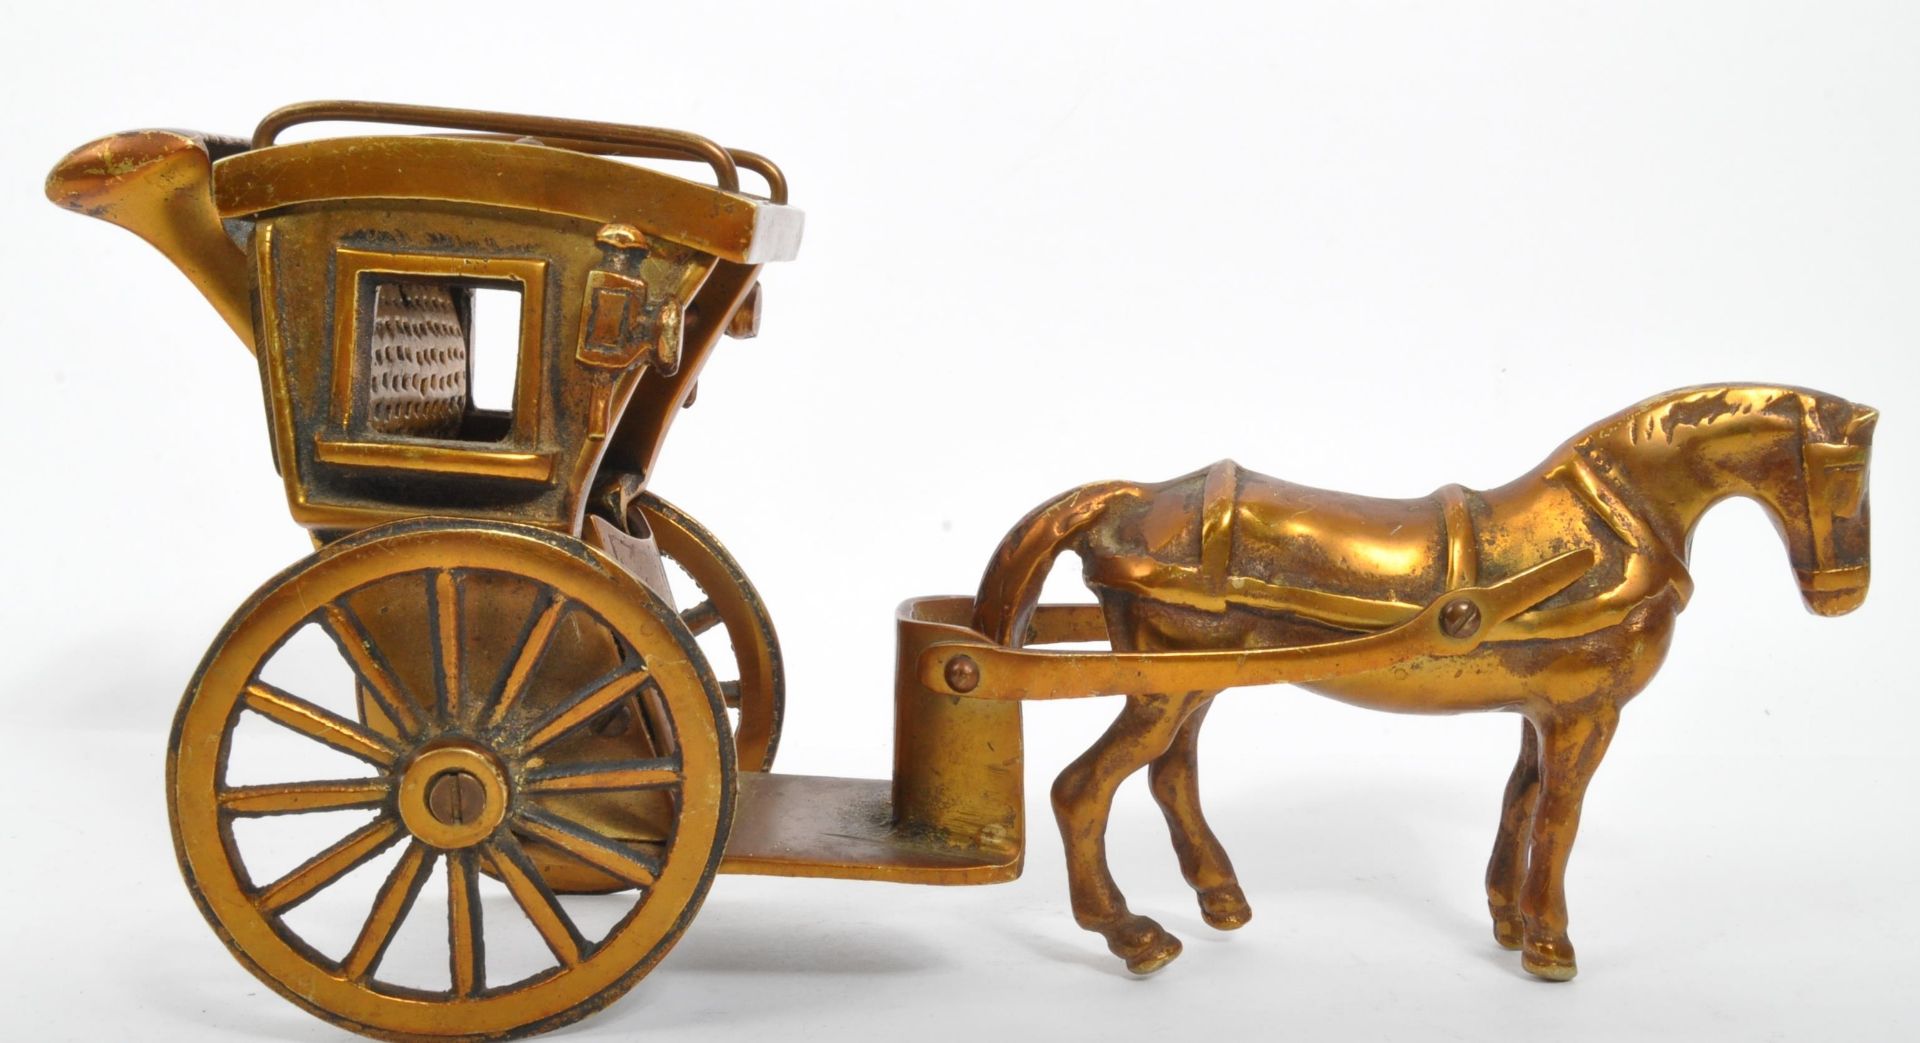 TWO VINTAGE 20TH CENTURY BRASS HORSE & CART FIGURES - Image 5 of 6